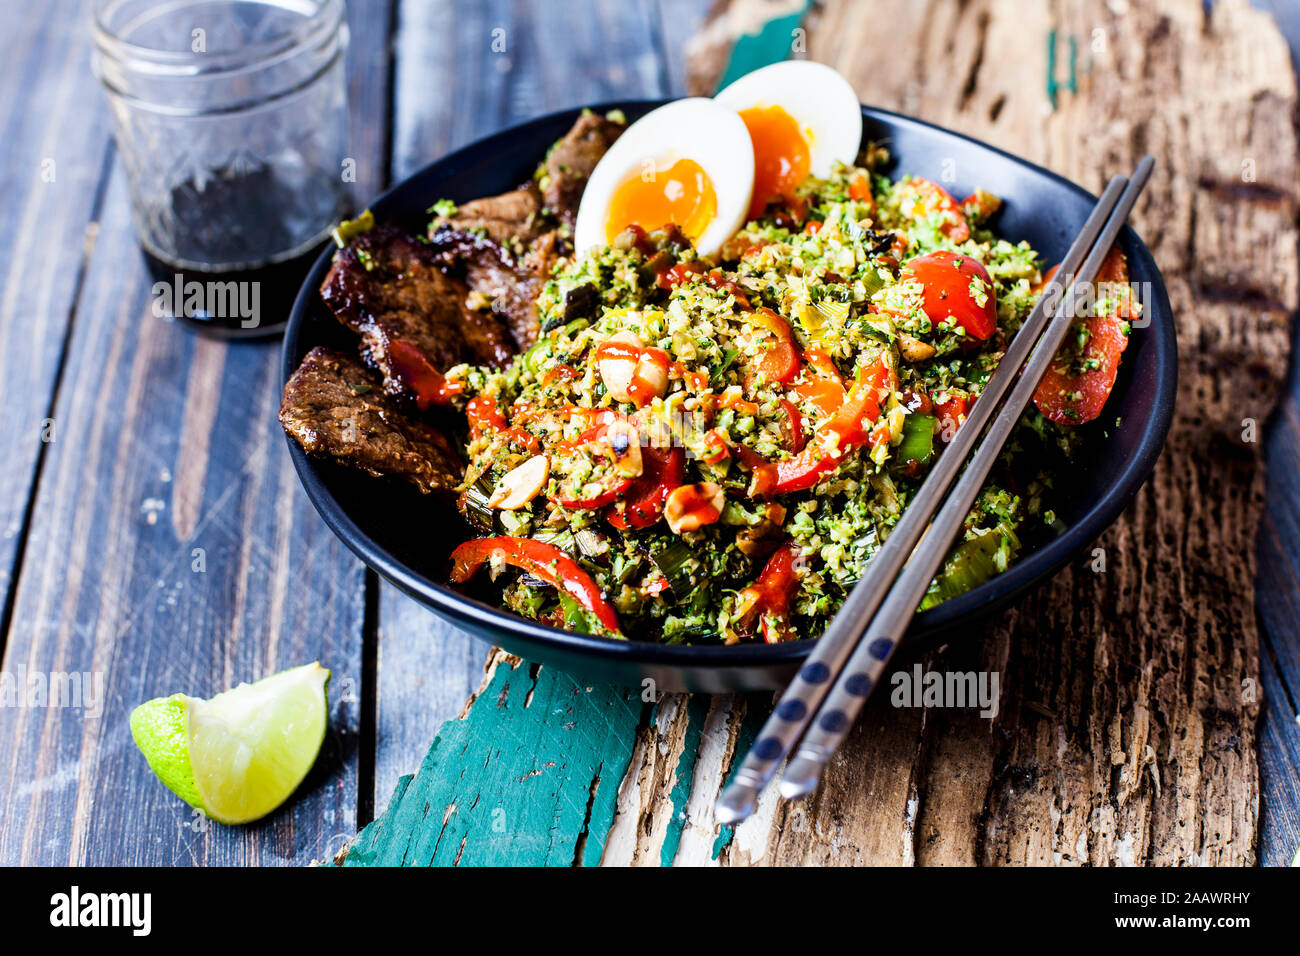 Thai style fried broccoli rice (shredded broccoli) with beef slices, eggs, and spicy sauce (ketogenic diet, paleo diet, low carb) Stock Photo